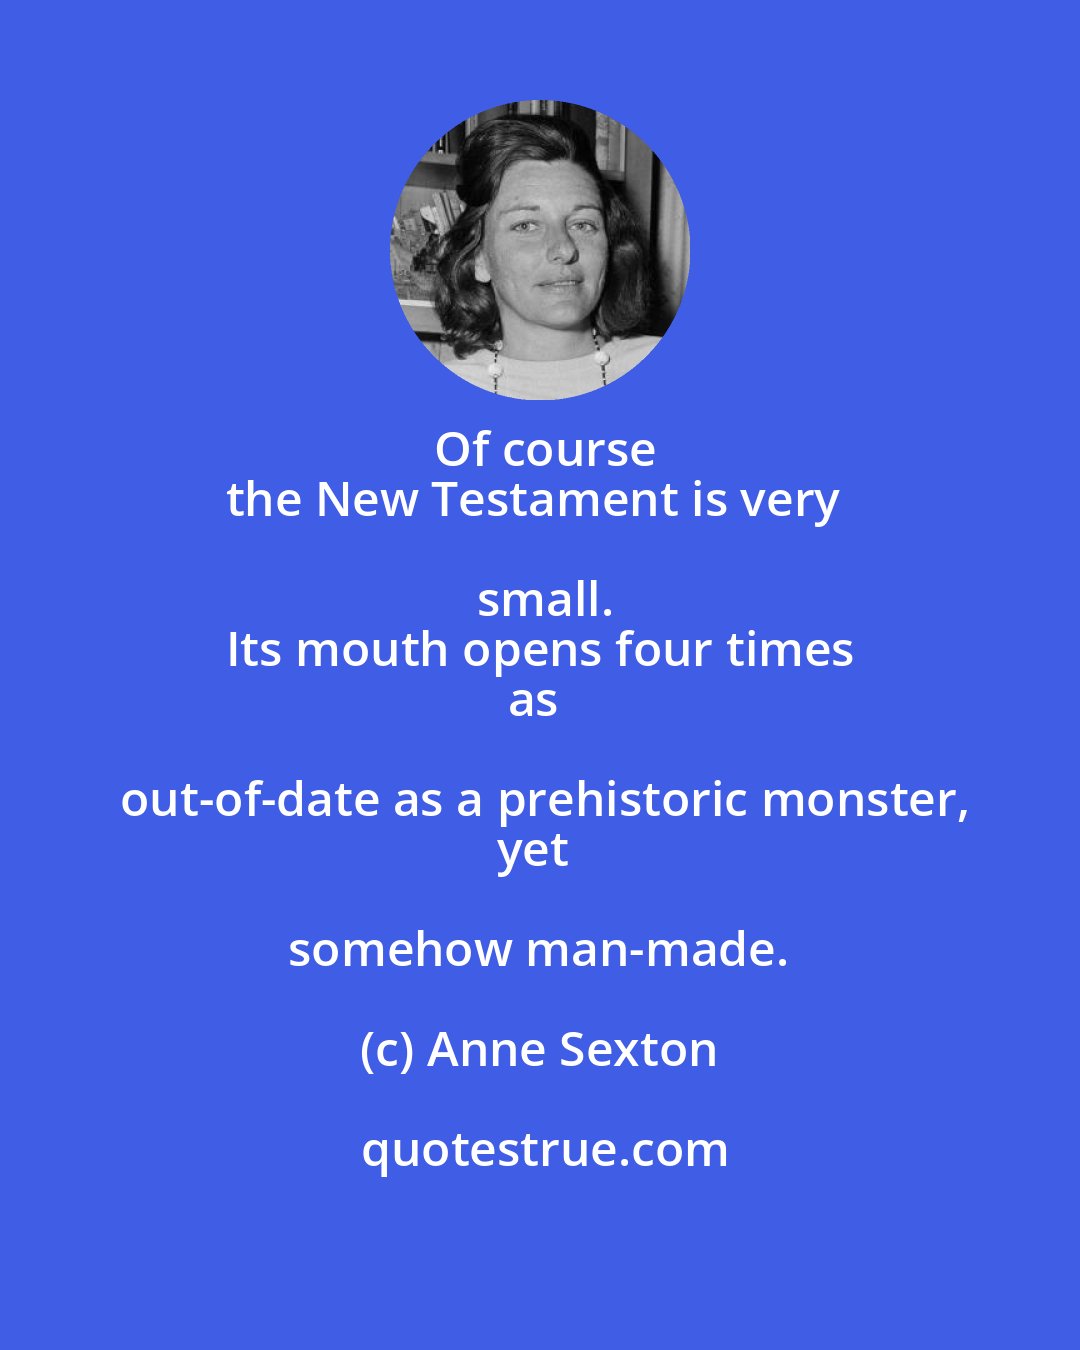 Anne Sexton: Of course
the New Testament is very small.
Its mouth opens four times
as out-of-date as a prehistoric monster,
yet somehow man-made.